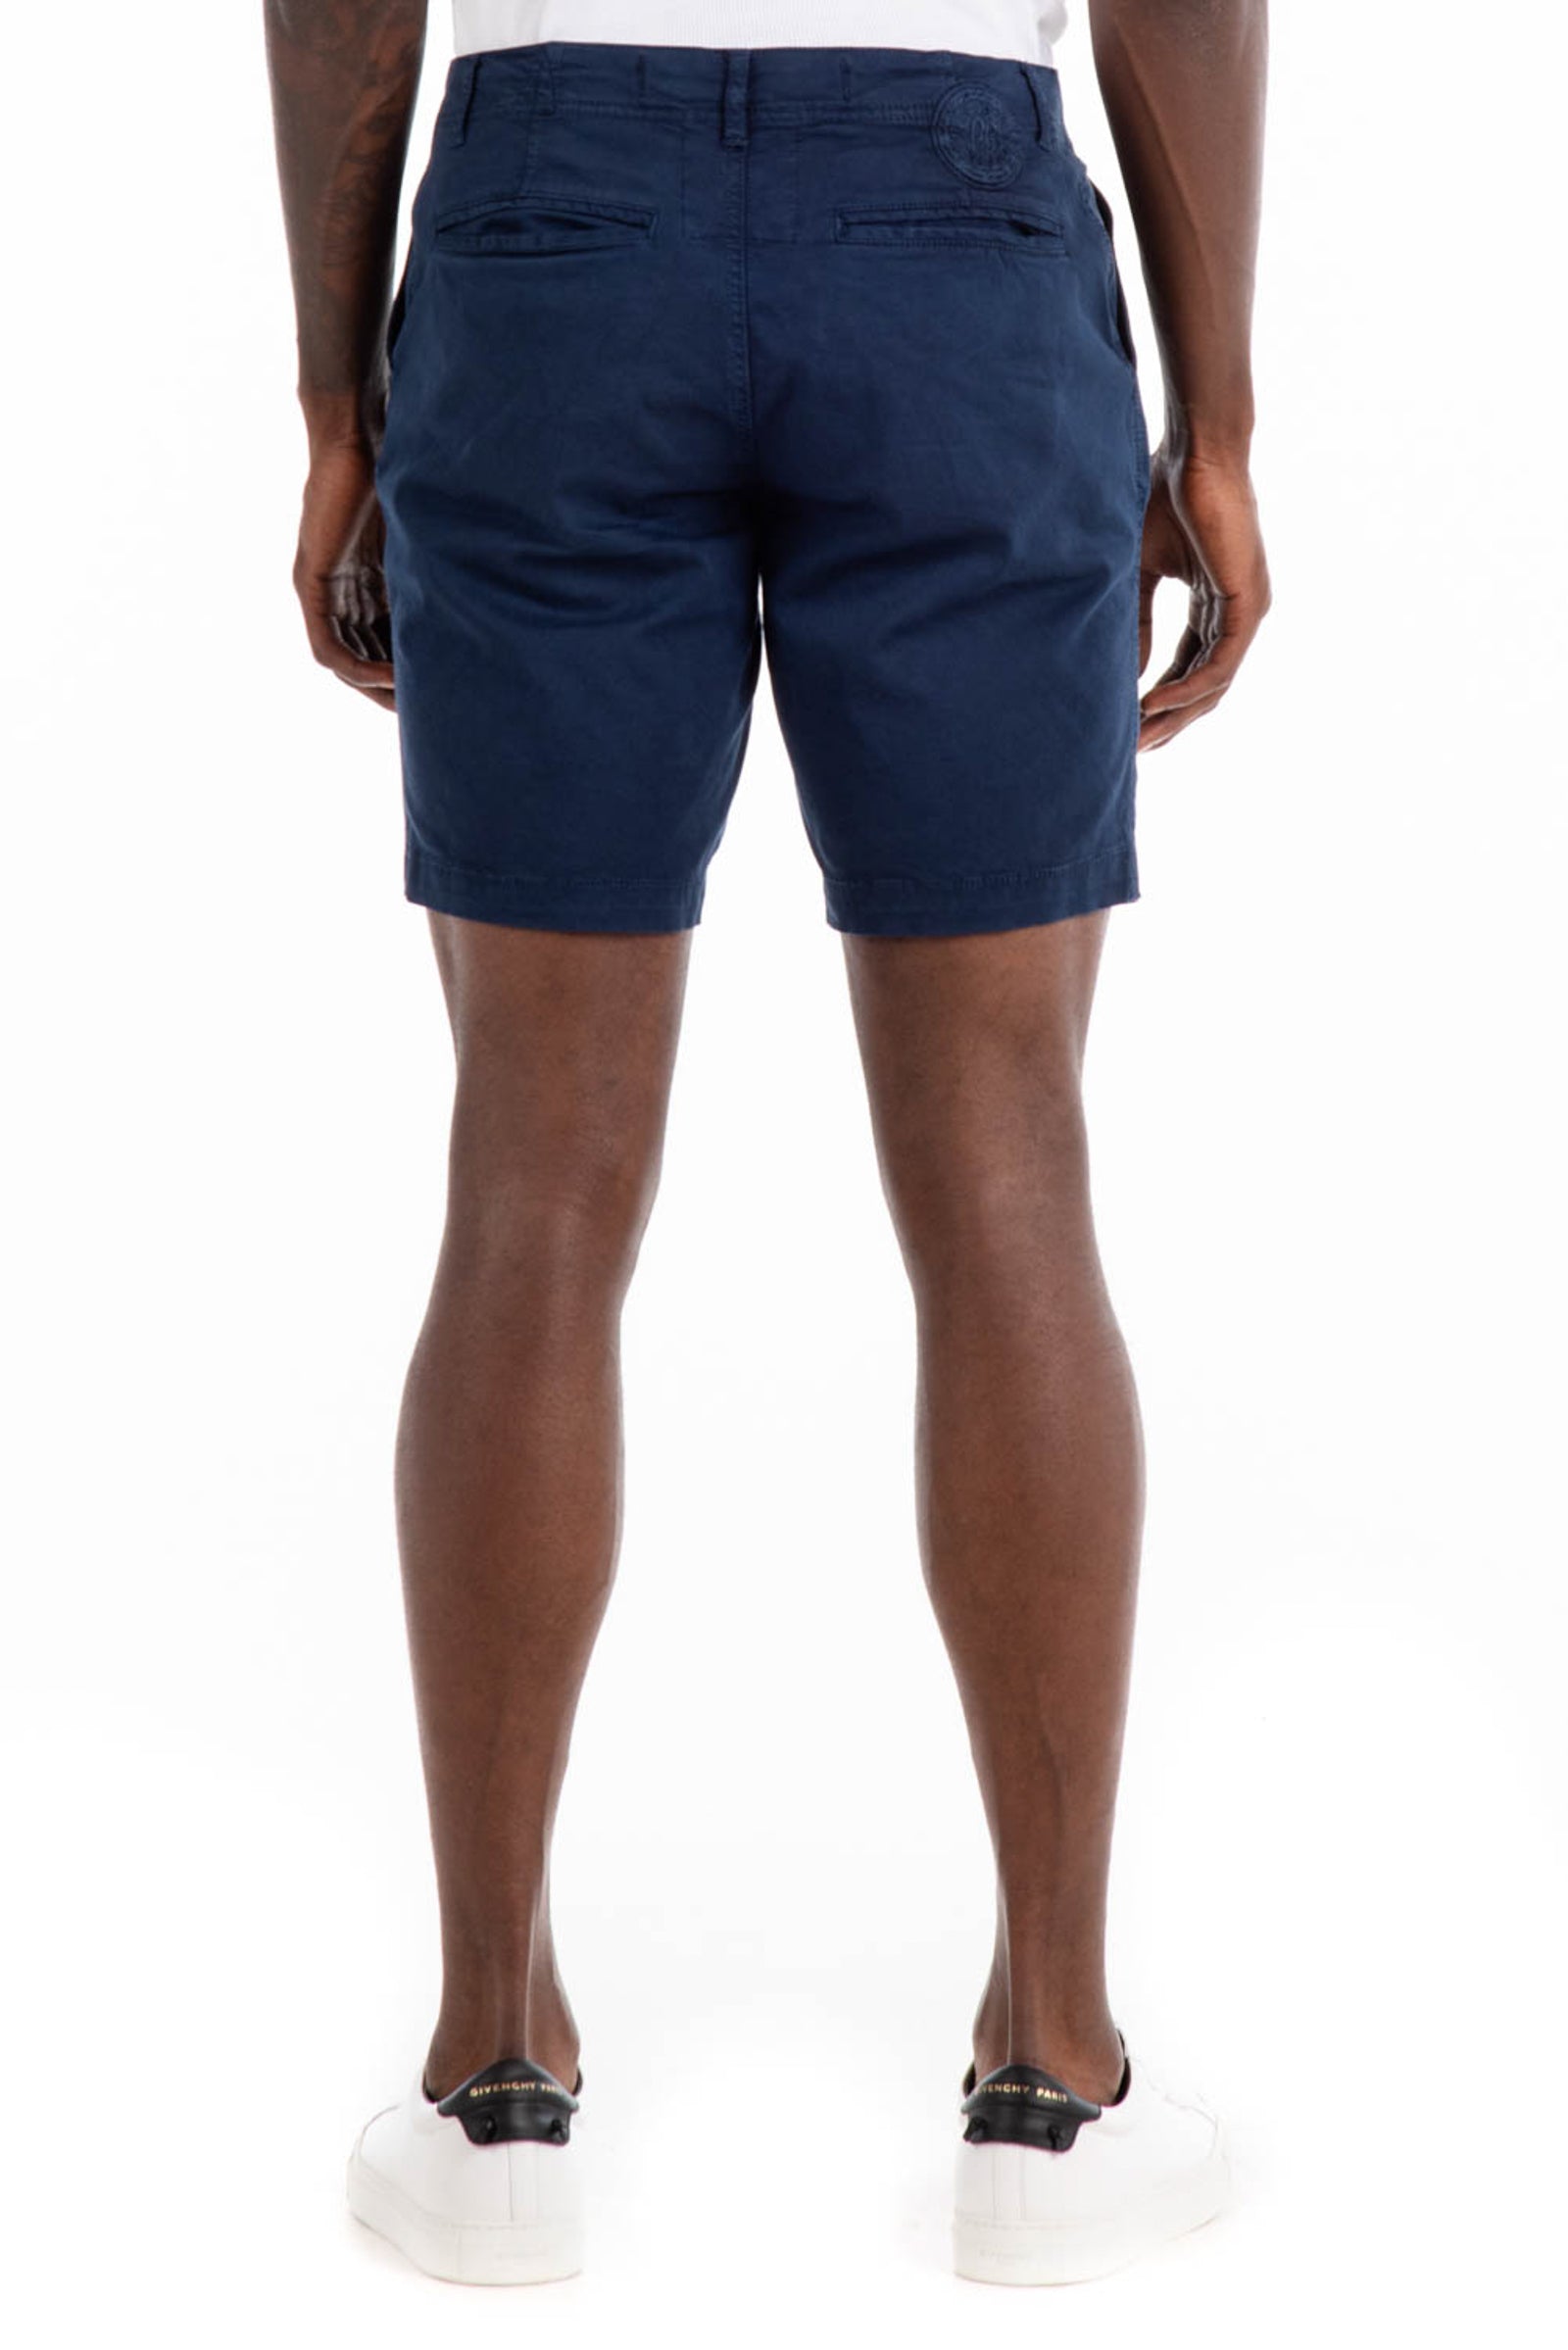 Original Paperbacks Walden Chino Short in Navy on Model Cropped Back View